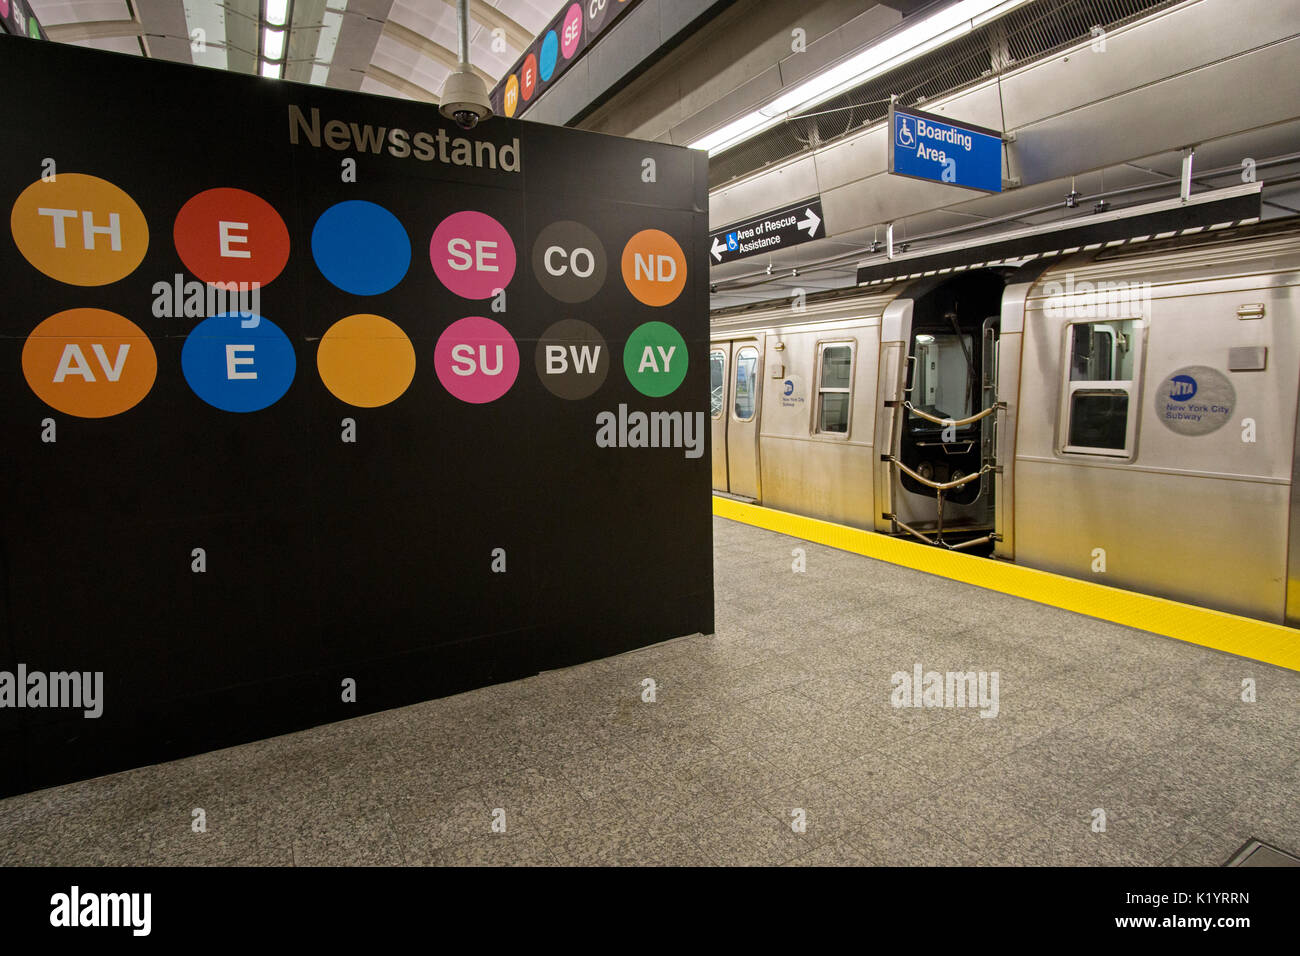 A Q train at the 86th Street subway station on the new Second avenue Line on the Upper East Side of Manhattan, New York City Stock Photo